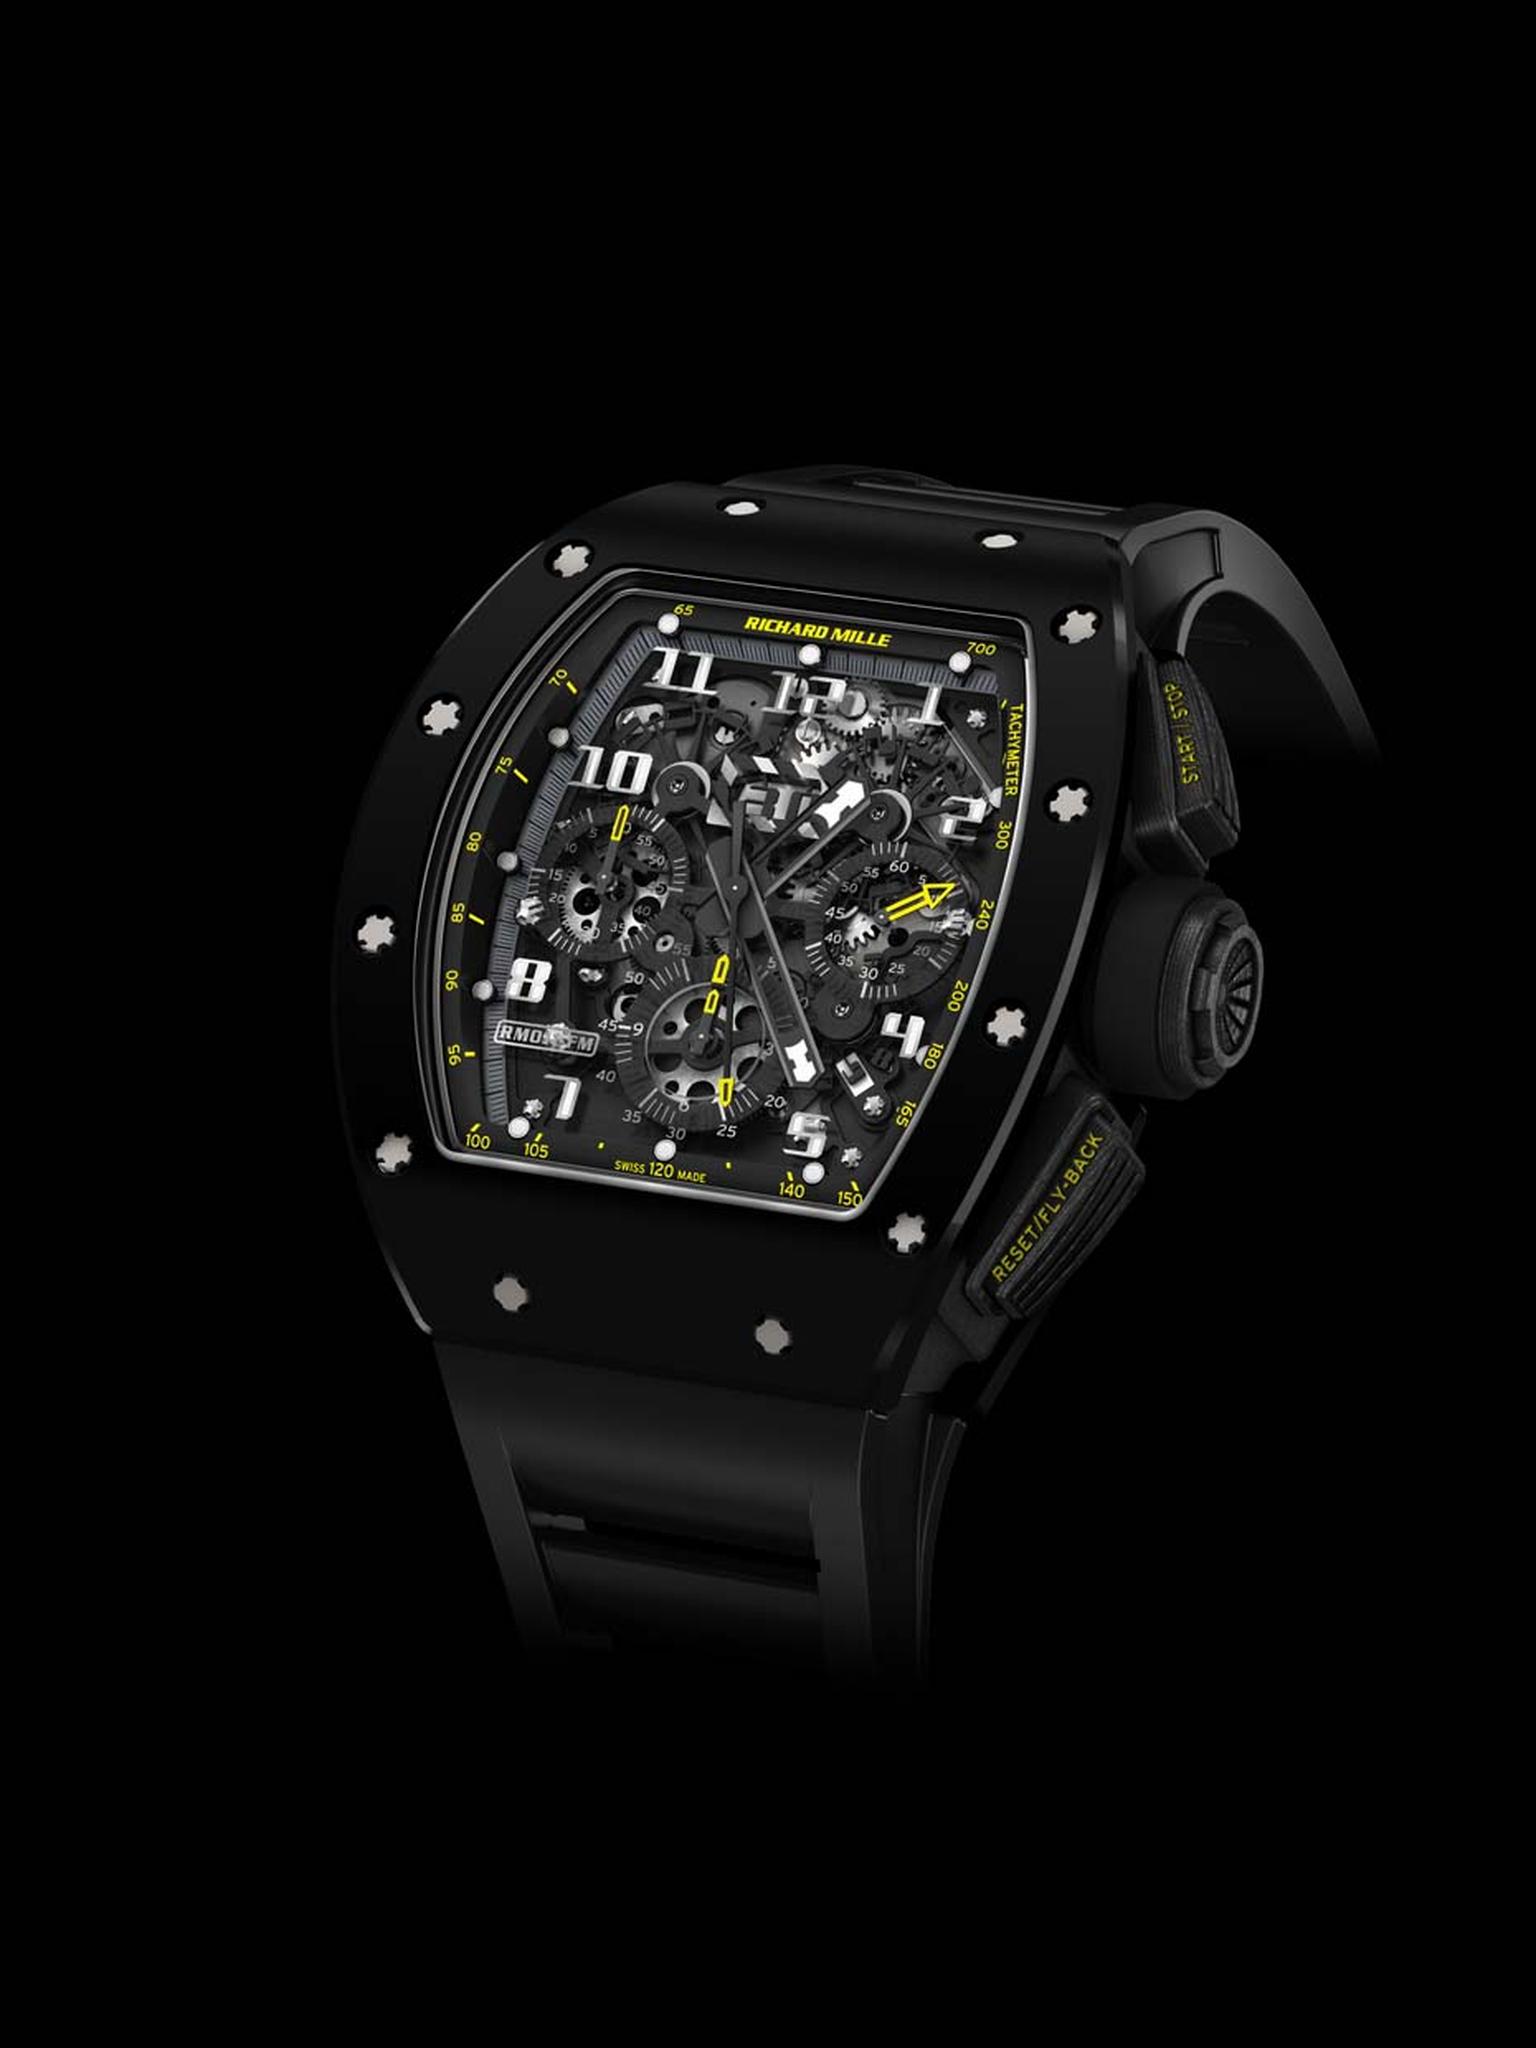 New to the Richard Mille watches stable is the RM 011 Yellow Flash Automatic Flyback Chronograph, the latest rendition of the iconic Felipe Massa watch and limited to just 50 pieces. Equipped with a sophisticated flyback chronograph movement and crafted f